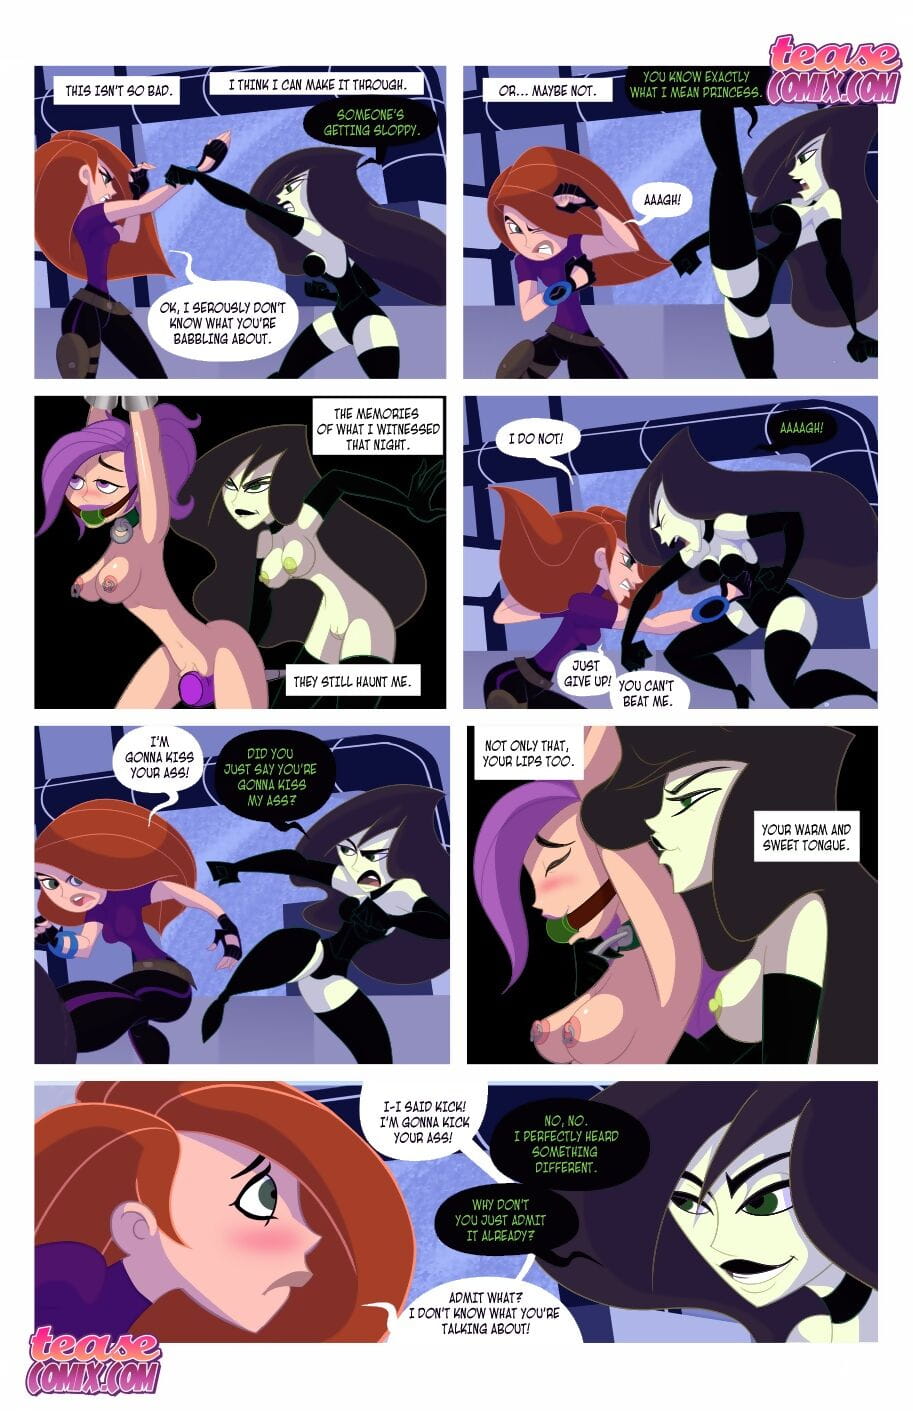 Teasecomix- Ironwolf – Kinky Possible Issue #02 page 1